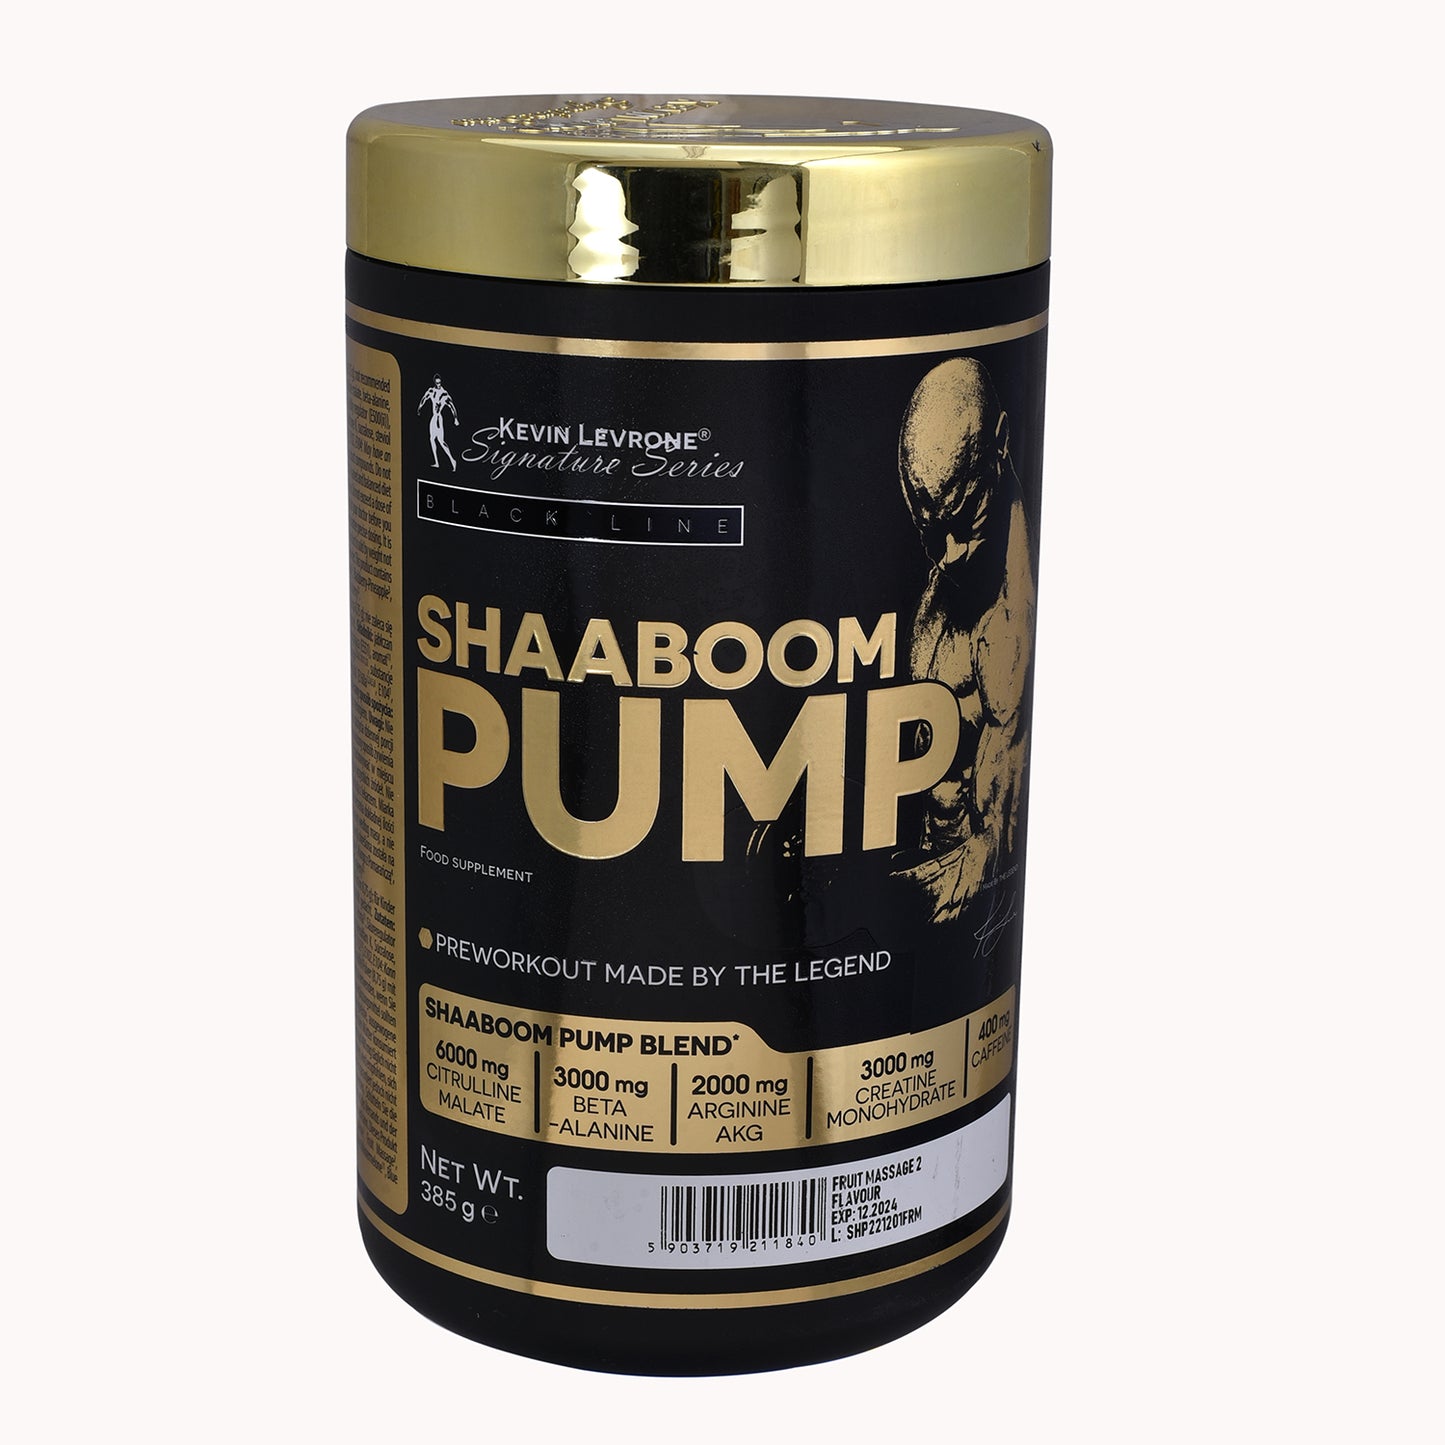 Kevin Levrone Shaaboom Pump Pre-workout, 44 servings